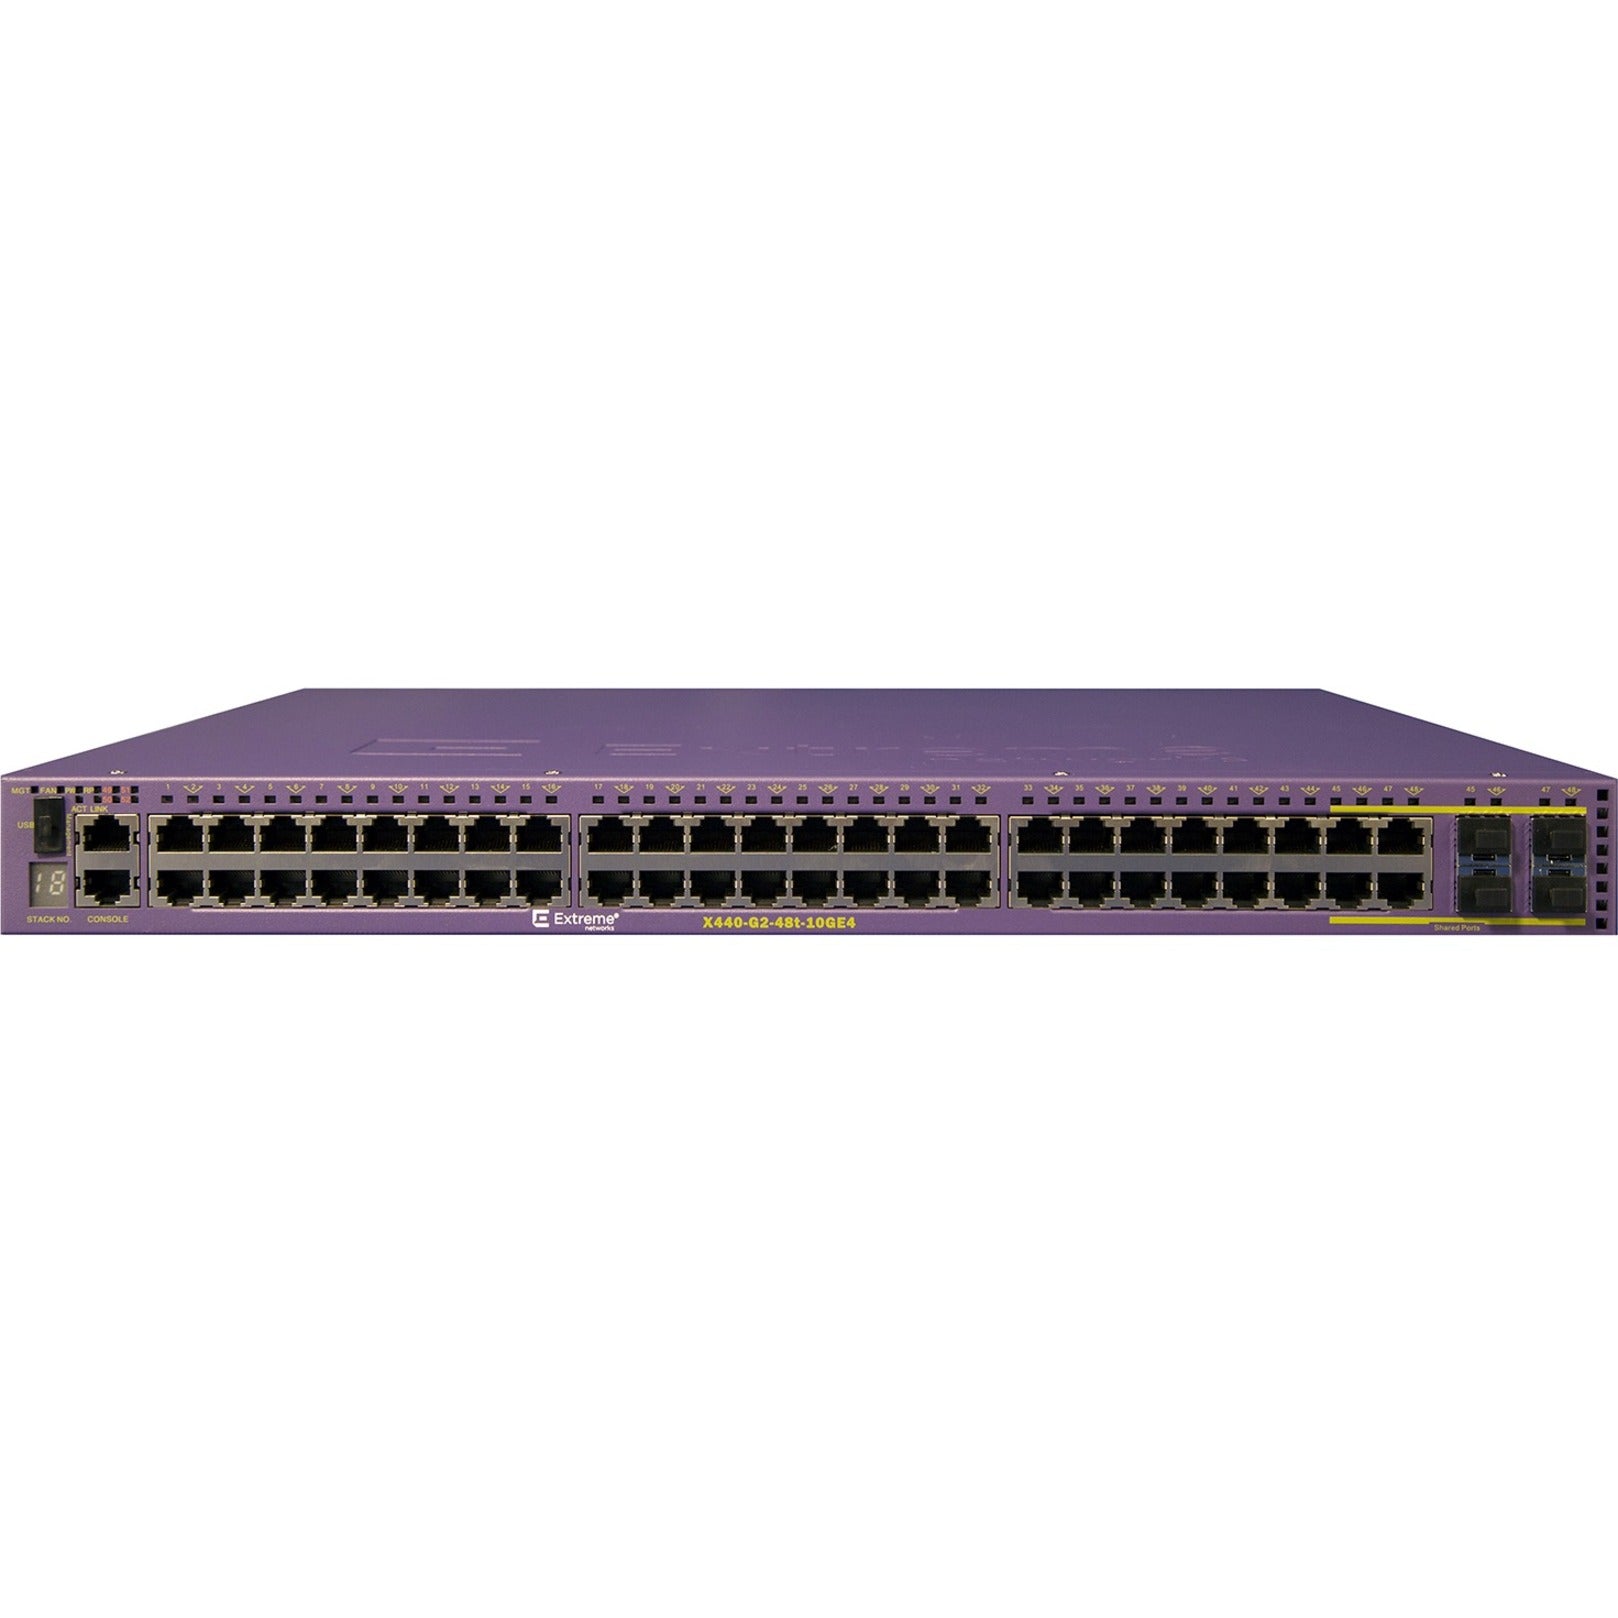 Extreme Networks X440-G2-48t-10GE4 Ethernet Switch (16534)